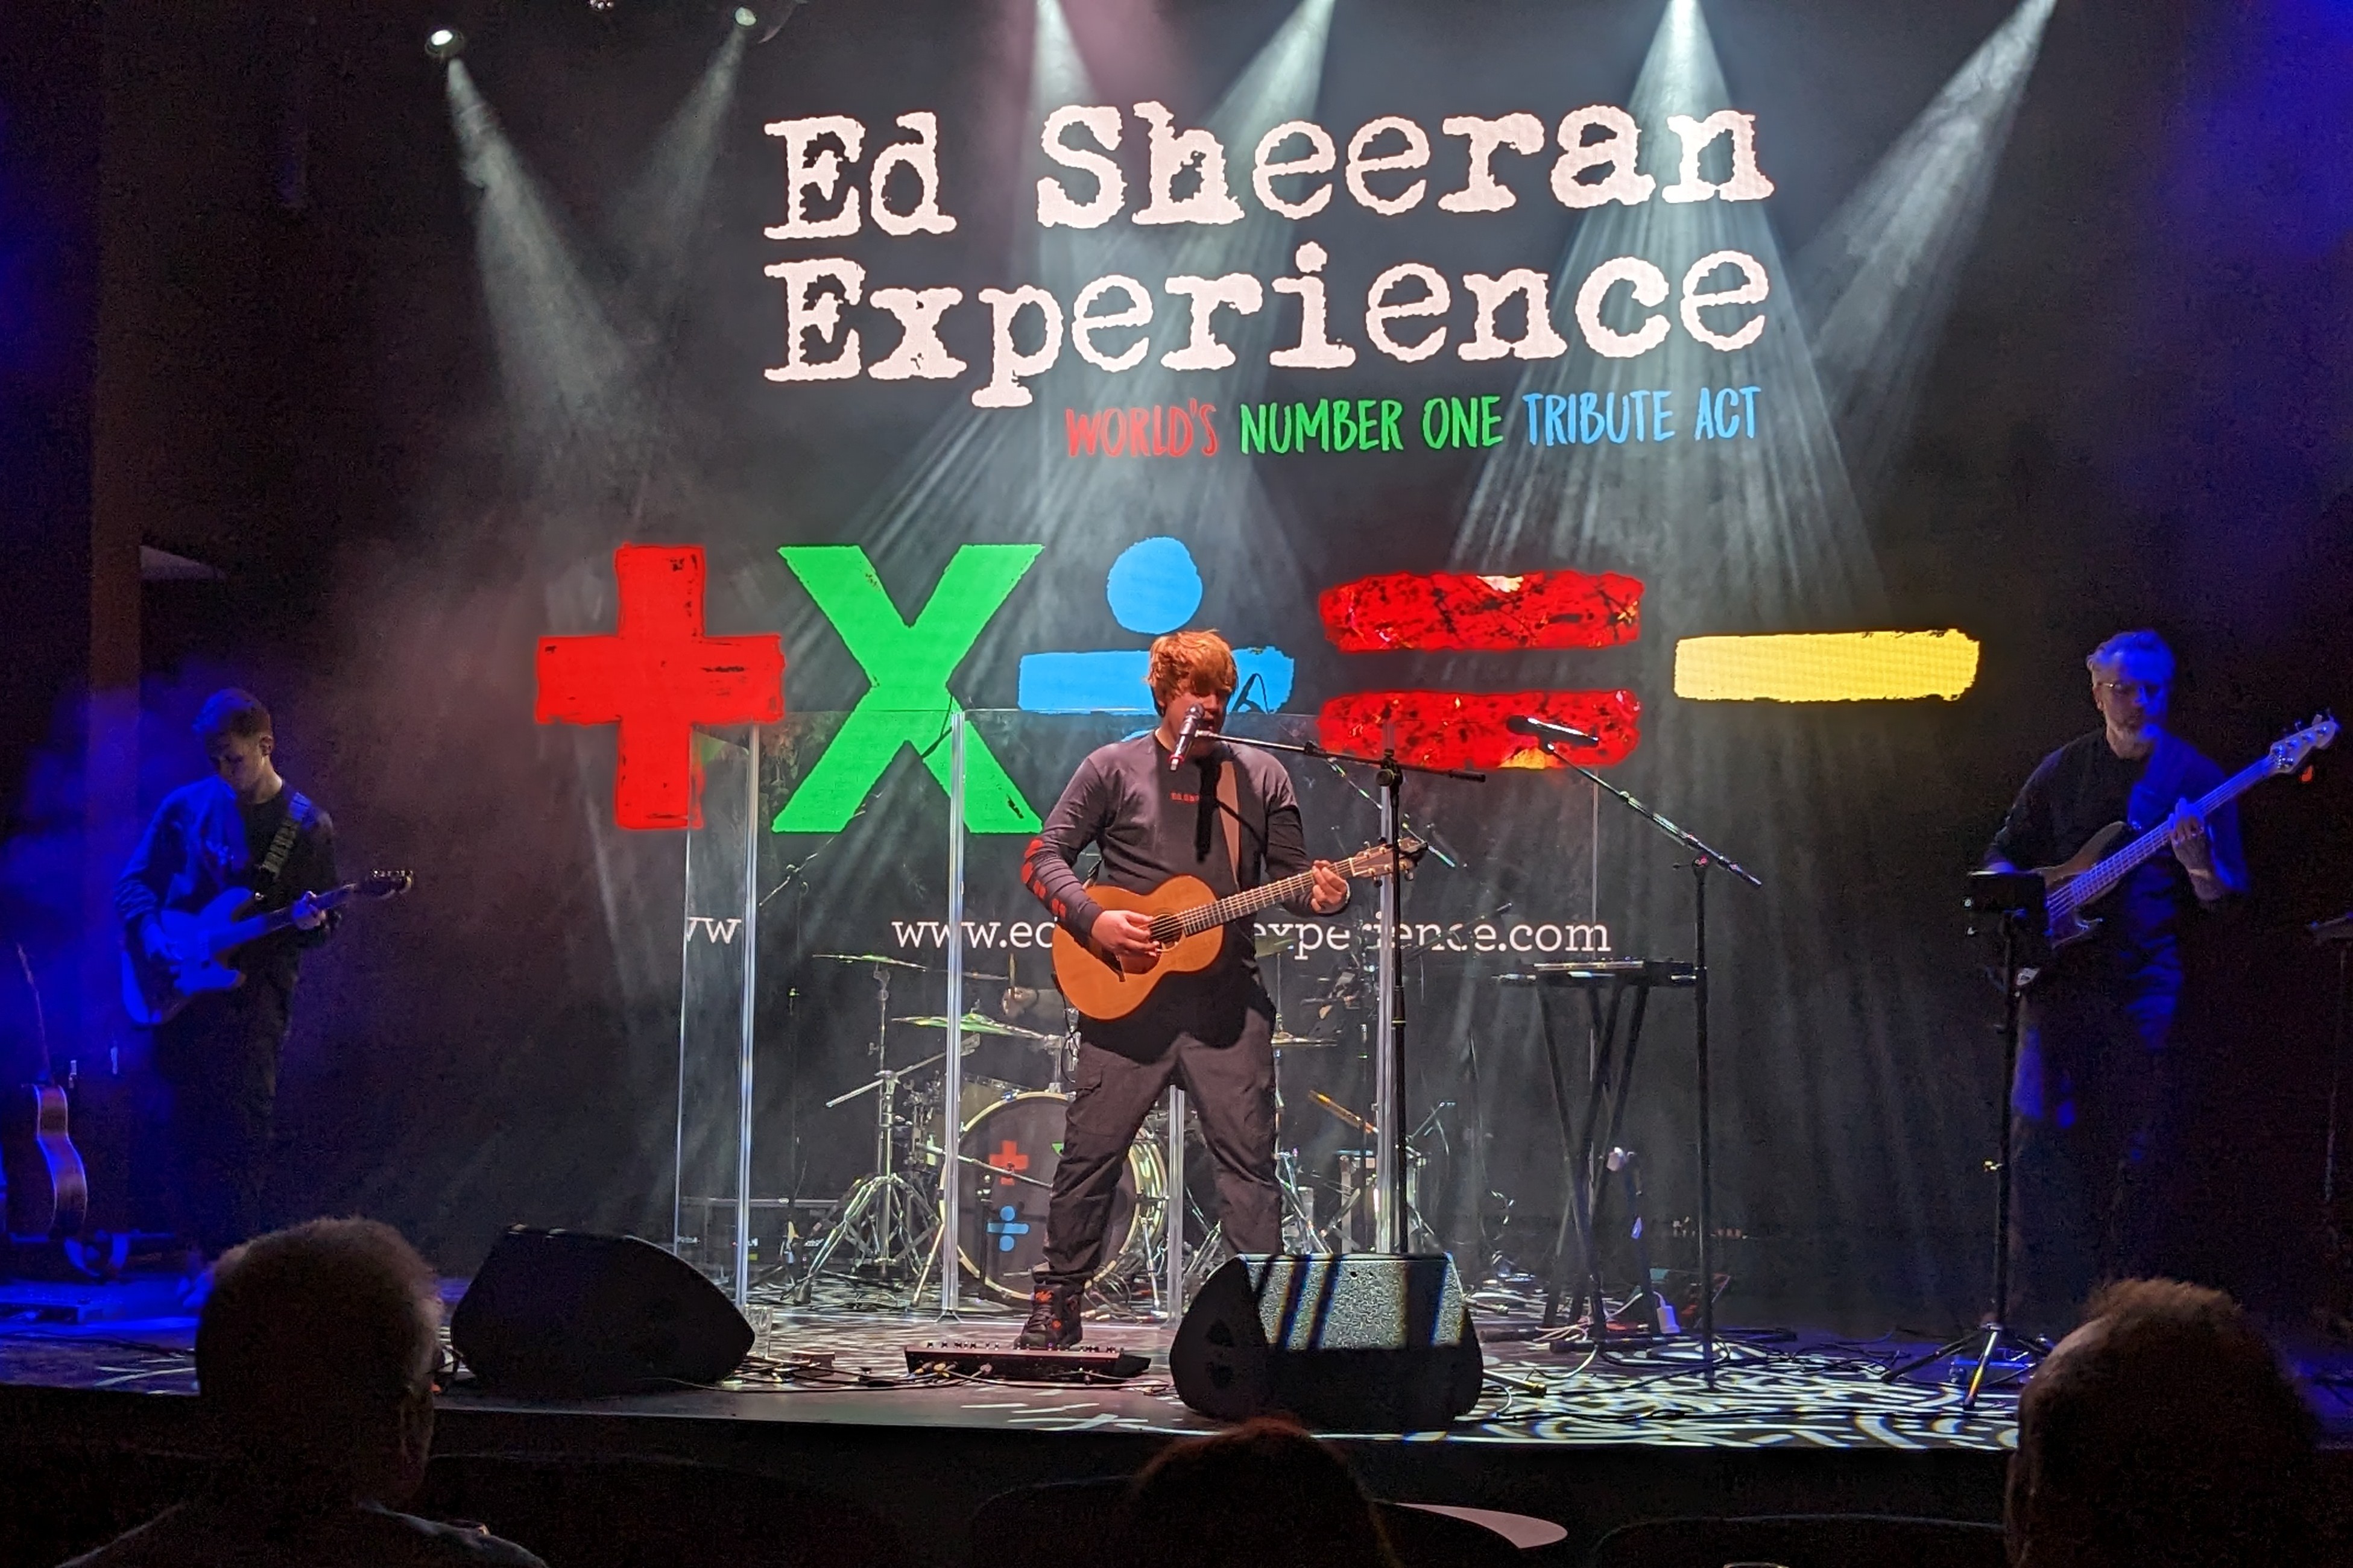 Tribute act the Ed Sheeran Experience performs in the main theatre at Heythrop Park